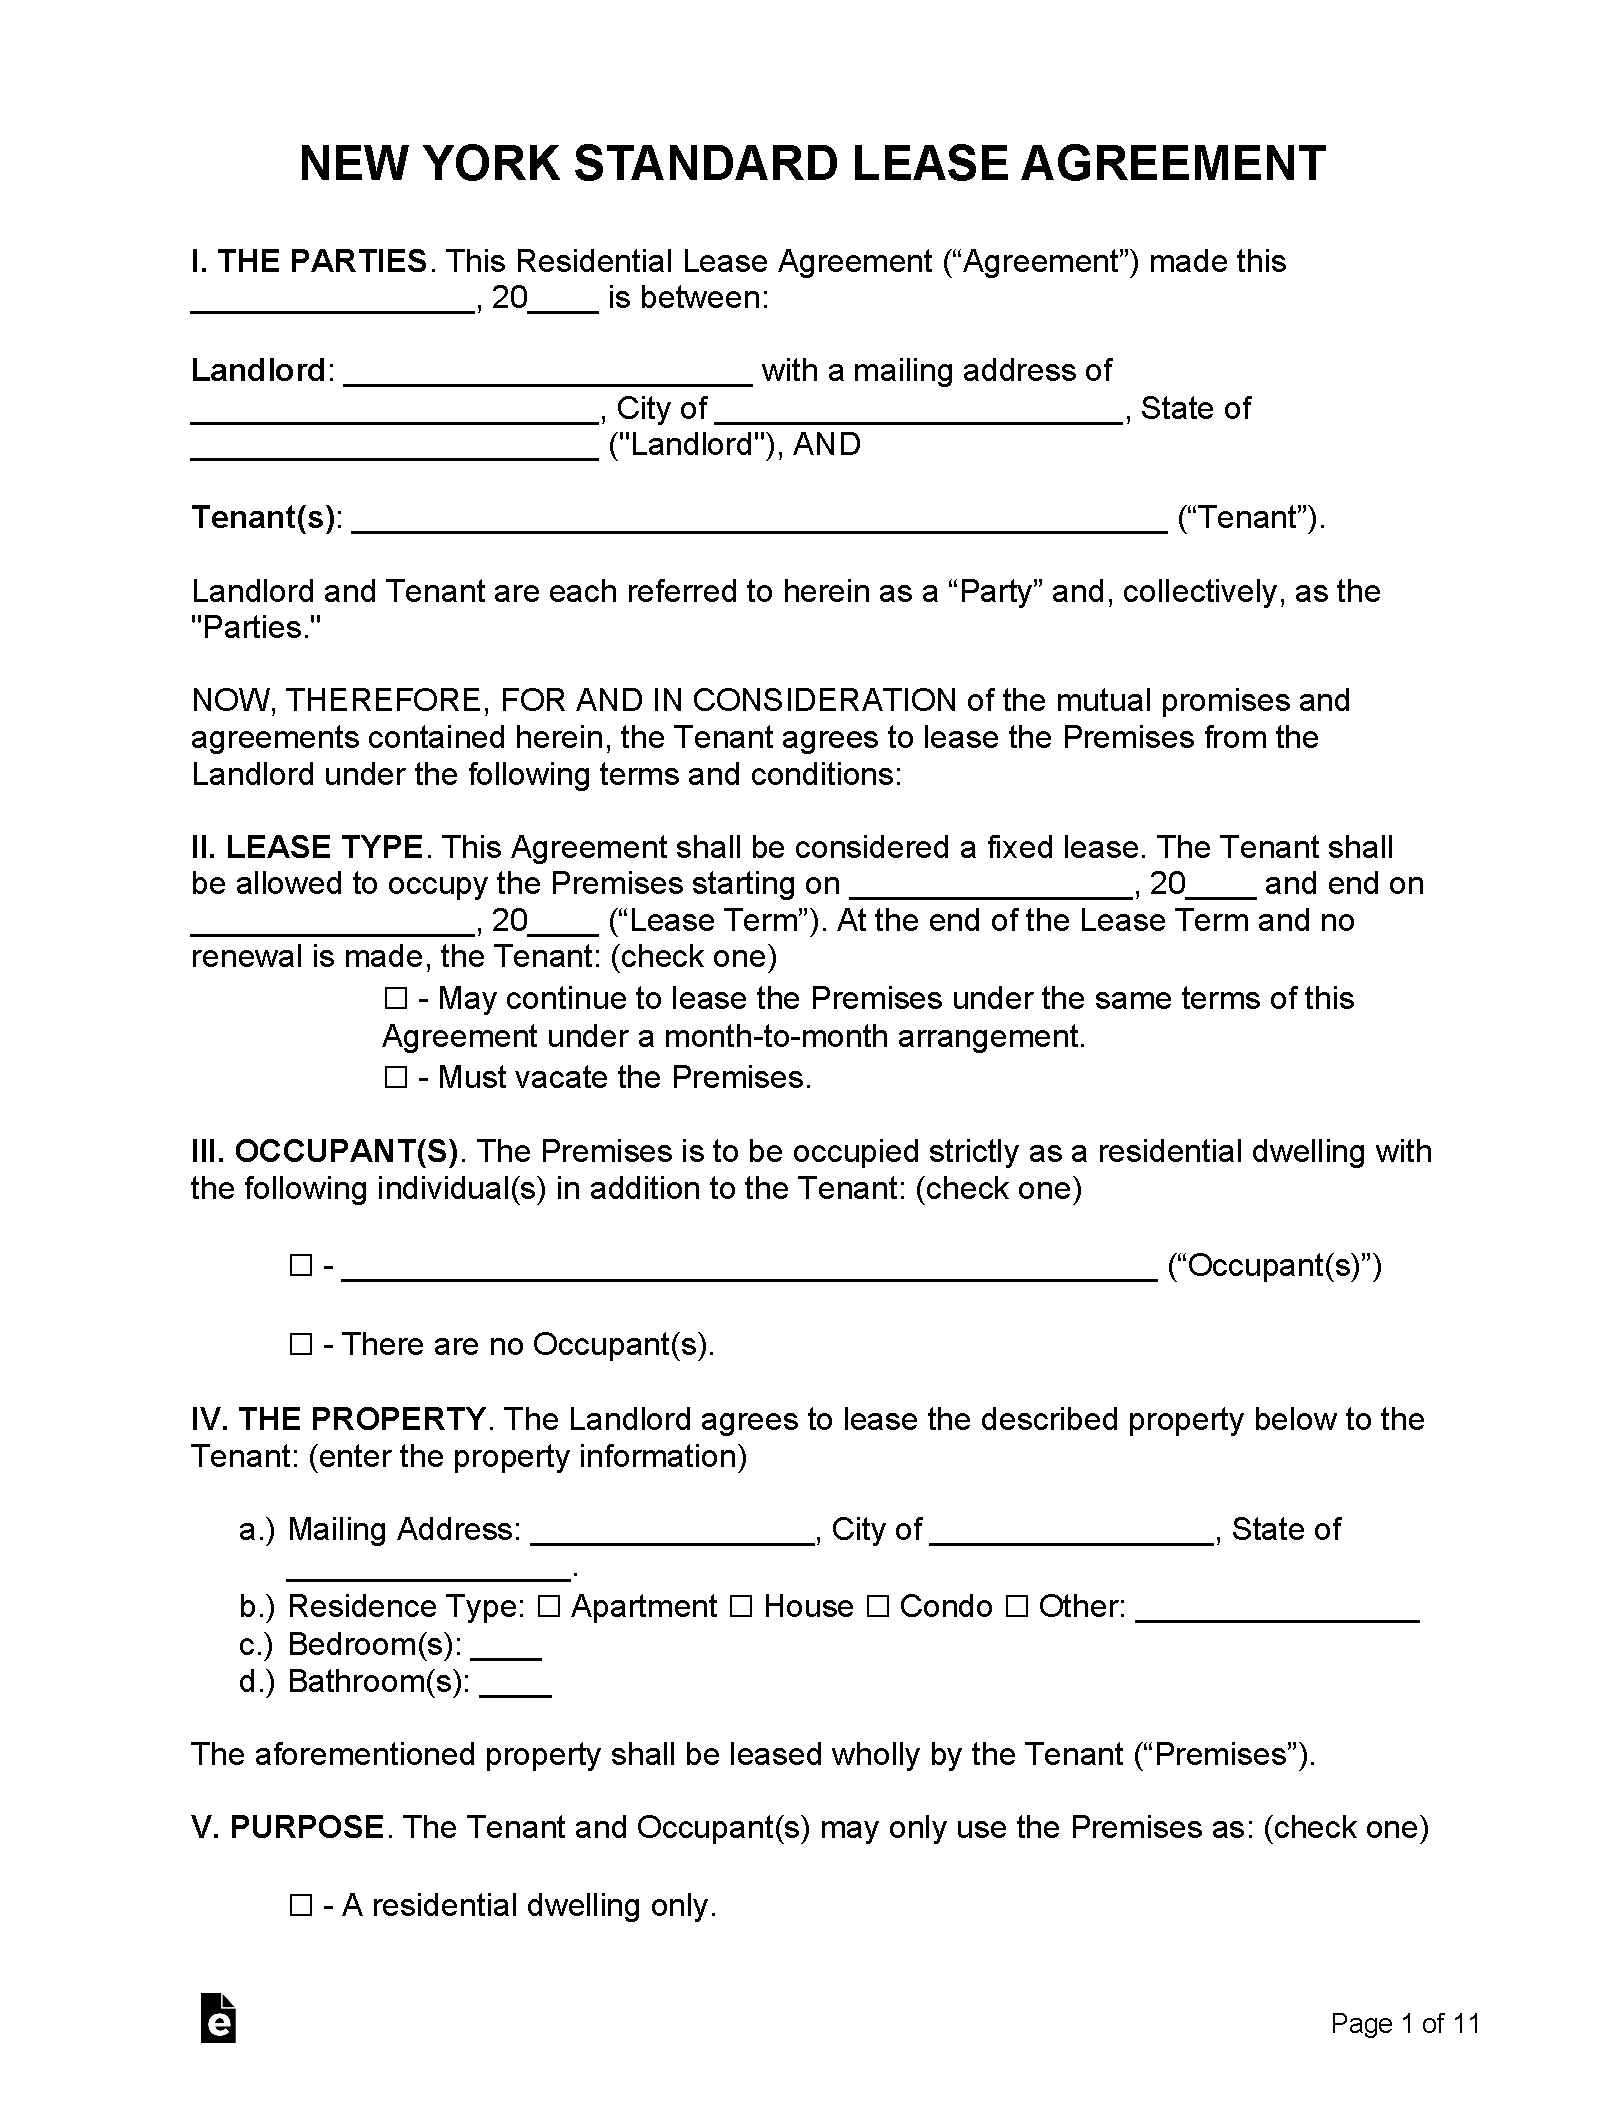 EForms New York Standard Residential Lease Agreement Template 